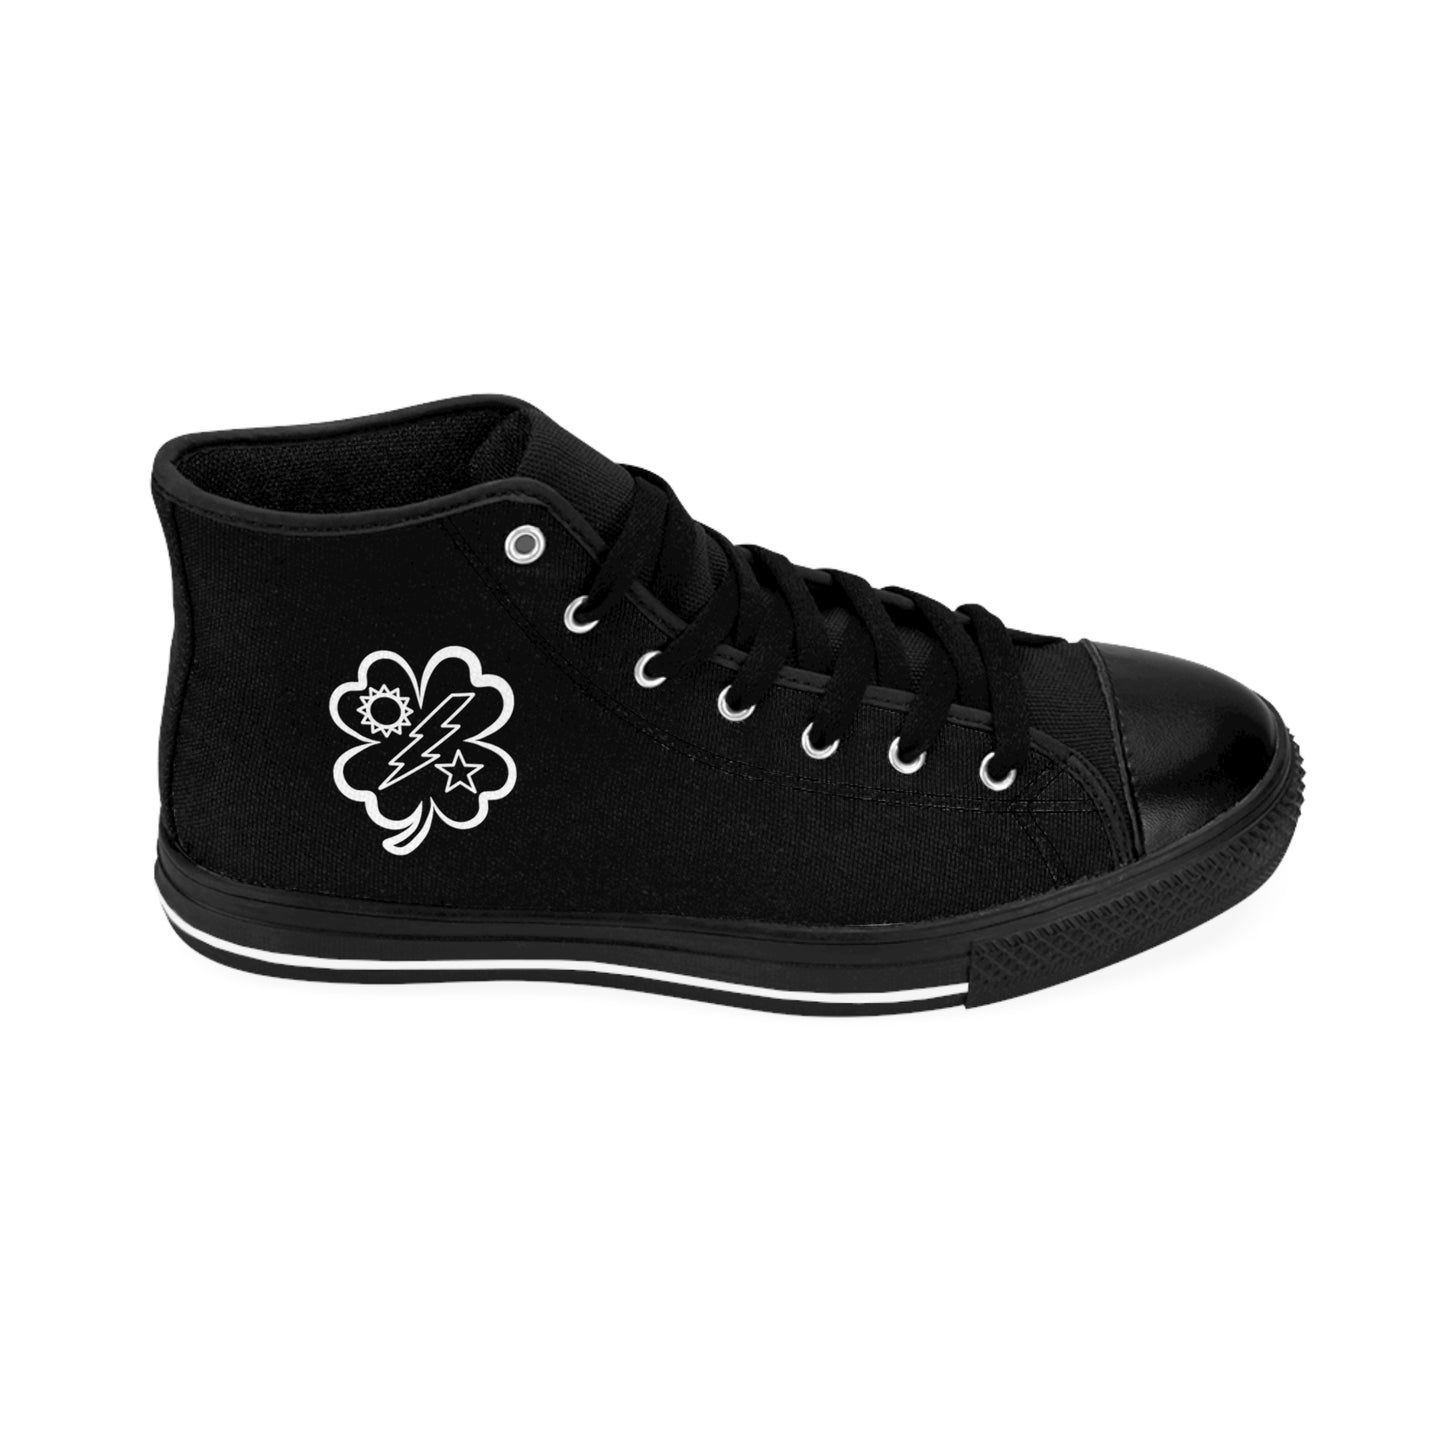 1st Battalion Subdued Clover High Tops